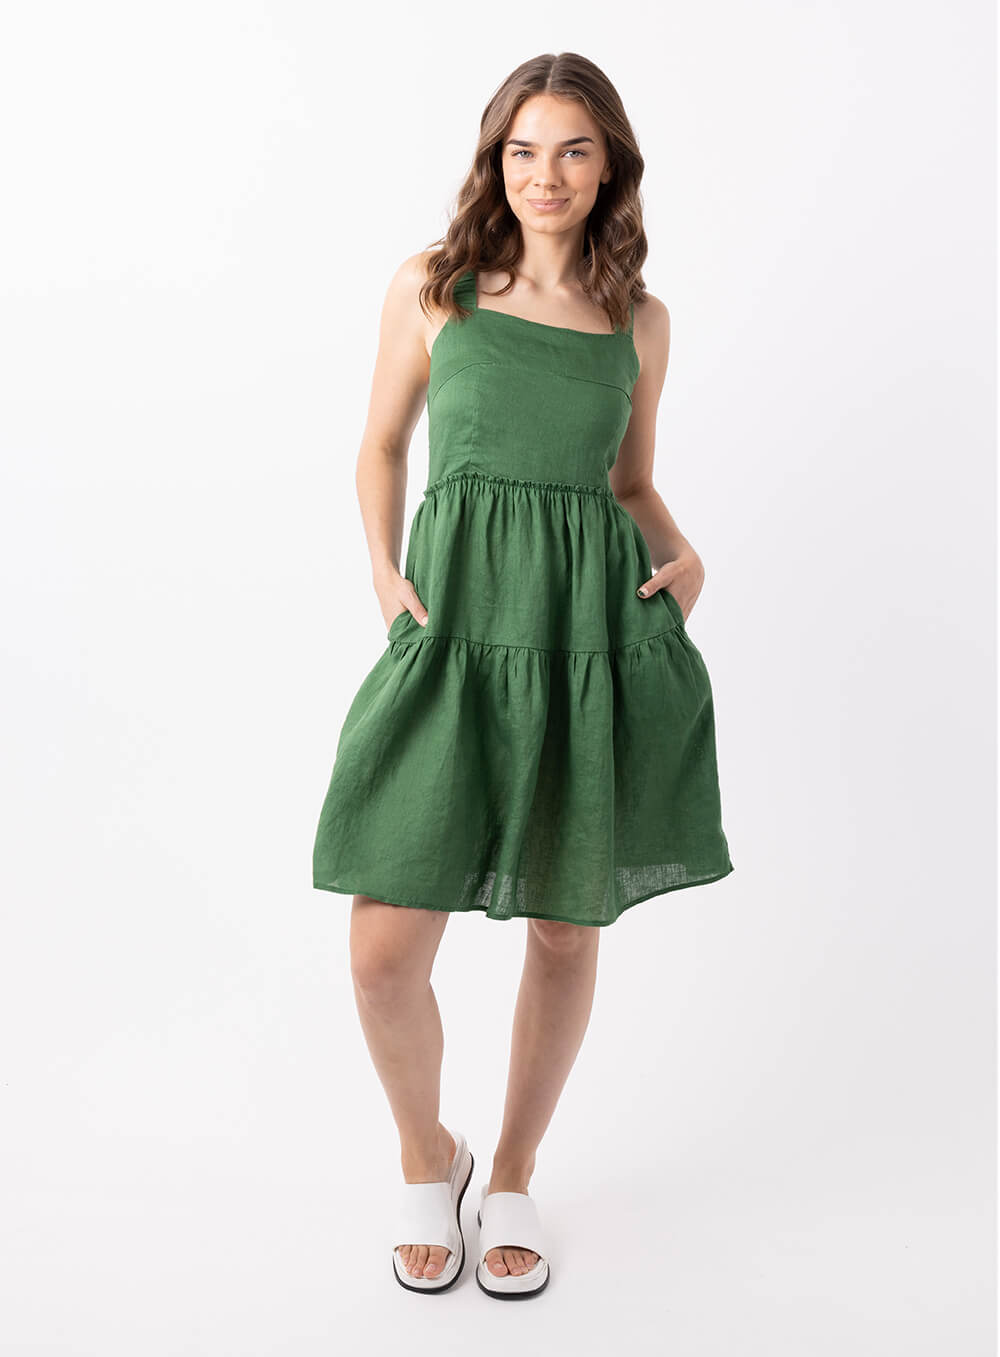 The Aquila linen dress in Green is 100% breathable linen midi in length with a tiered skirt, thin rouched straps and sqquare neckline